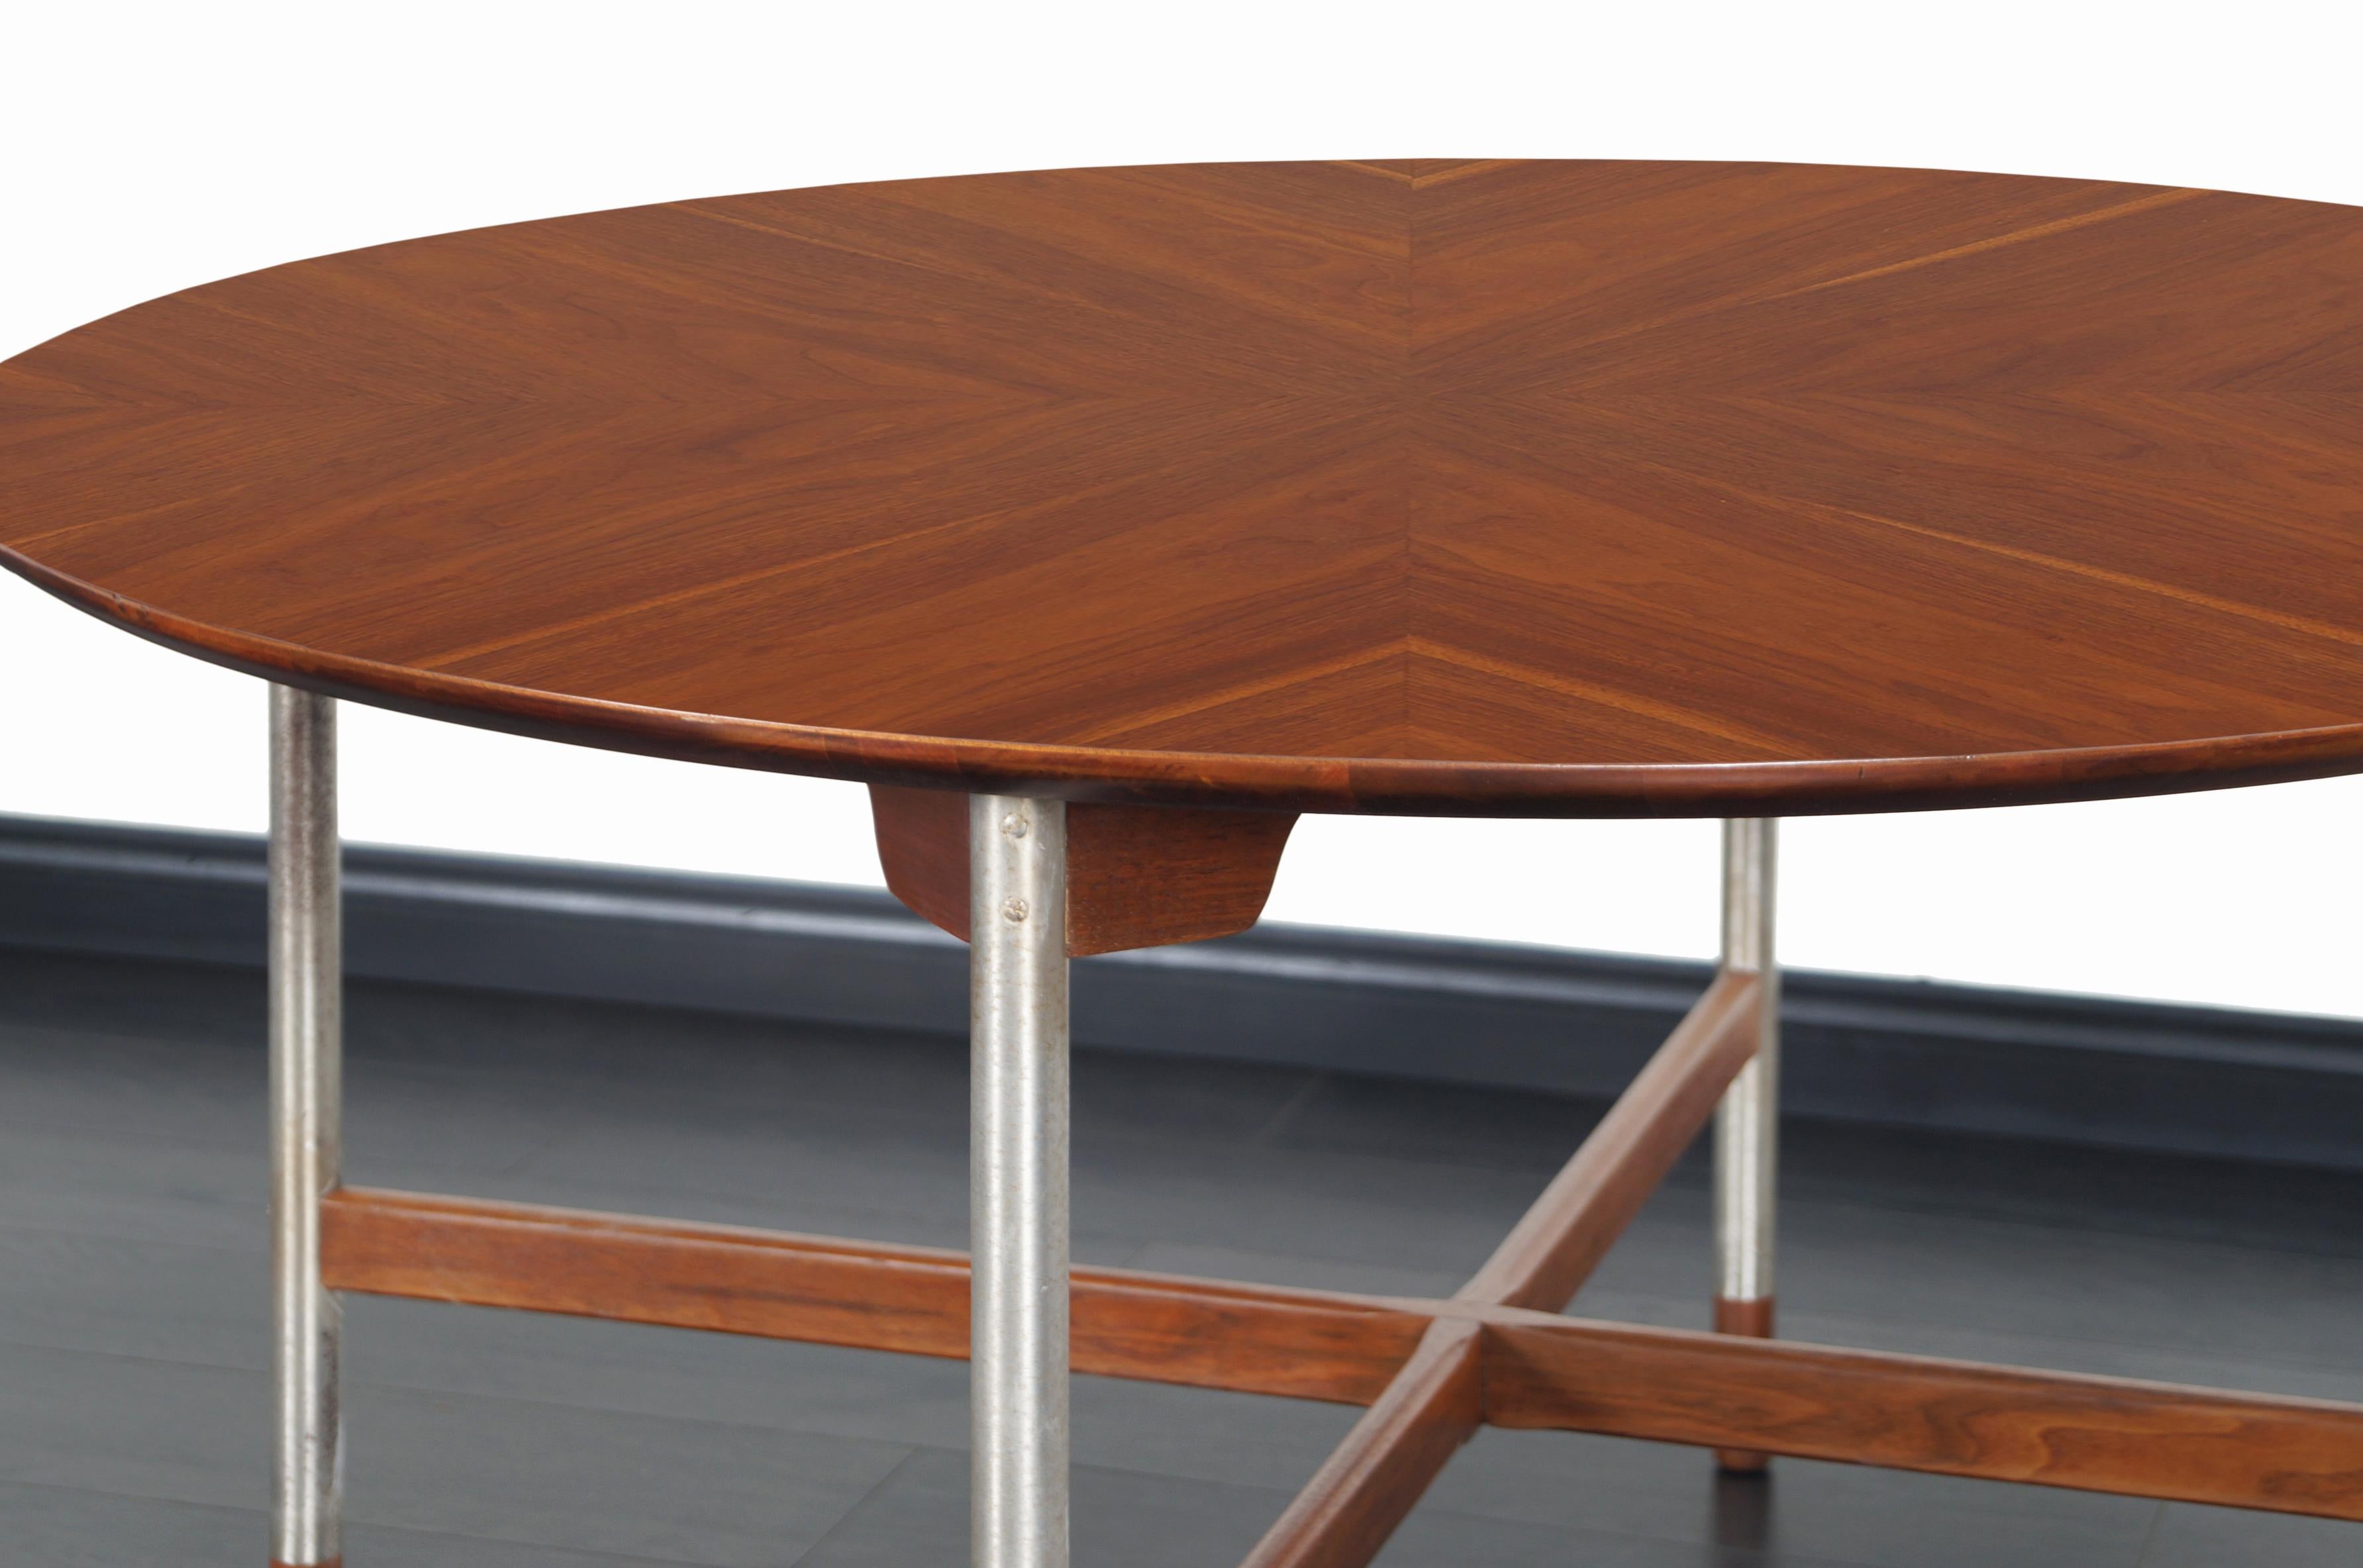 Mid-20th Century Midcentury Walnut and Brushed Steel Table by Jack Cartwright For Sale